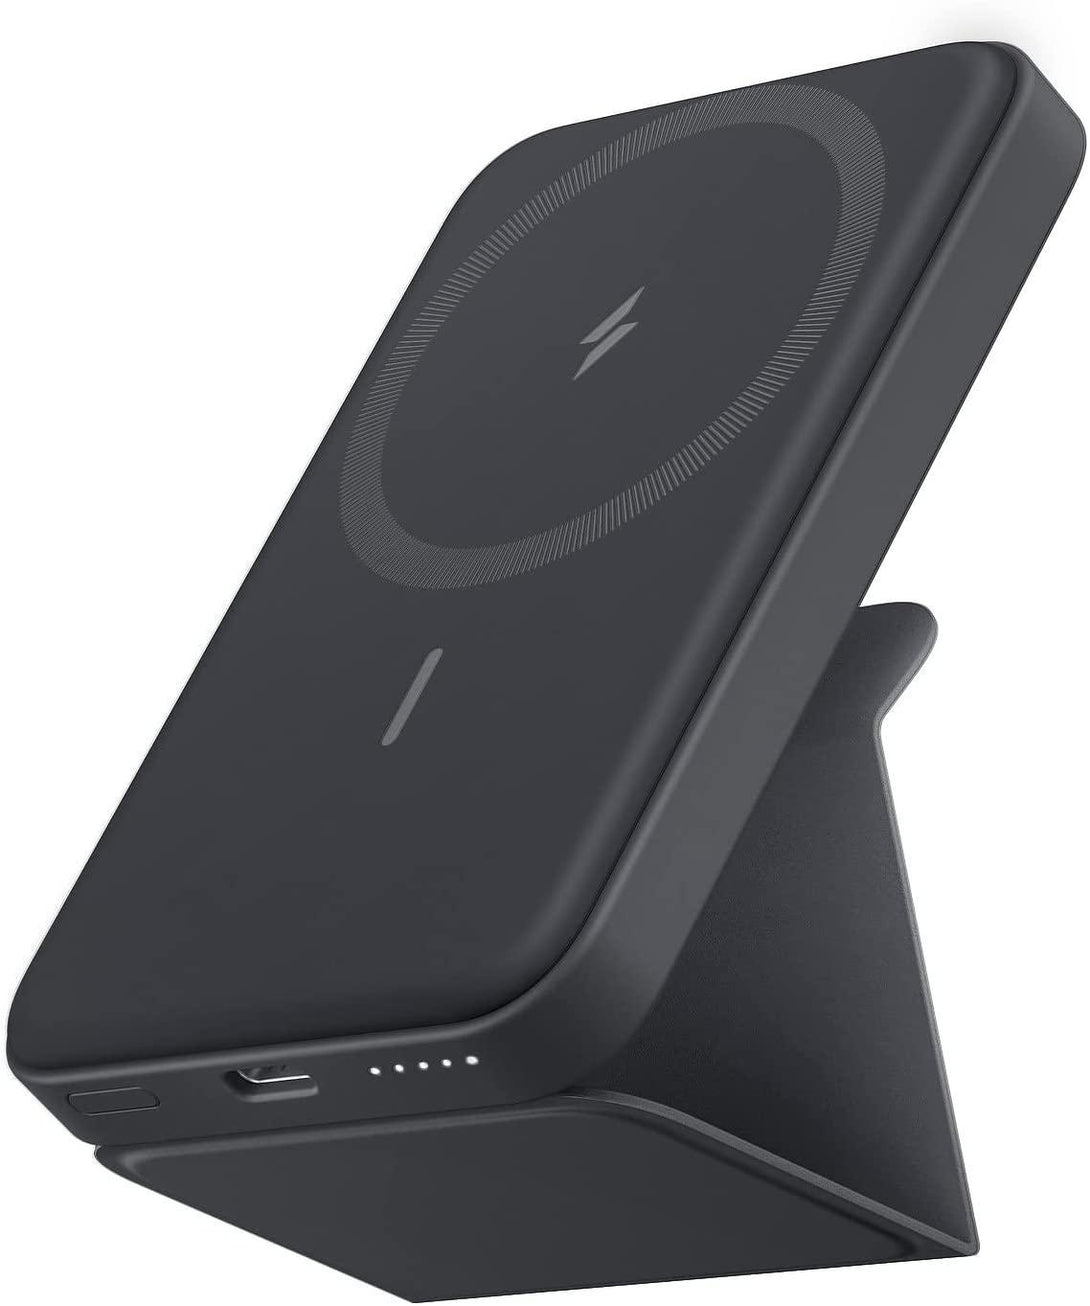 Anker 622 Magnetic Wireless Portable Charger (MagGo) – Interstellar Gray - Tech Goods